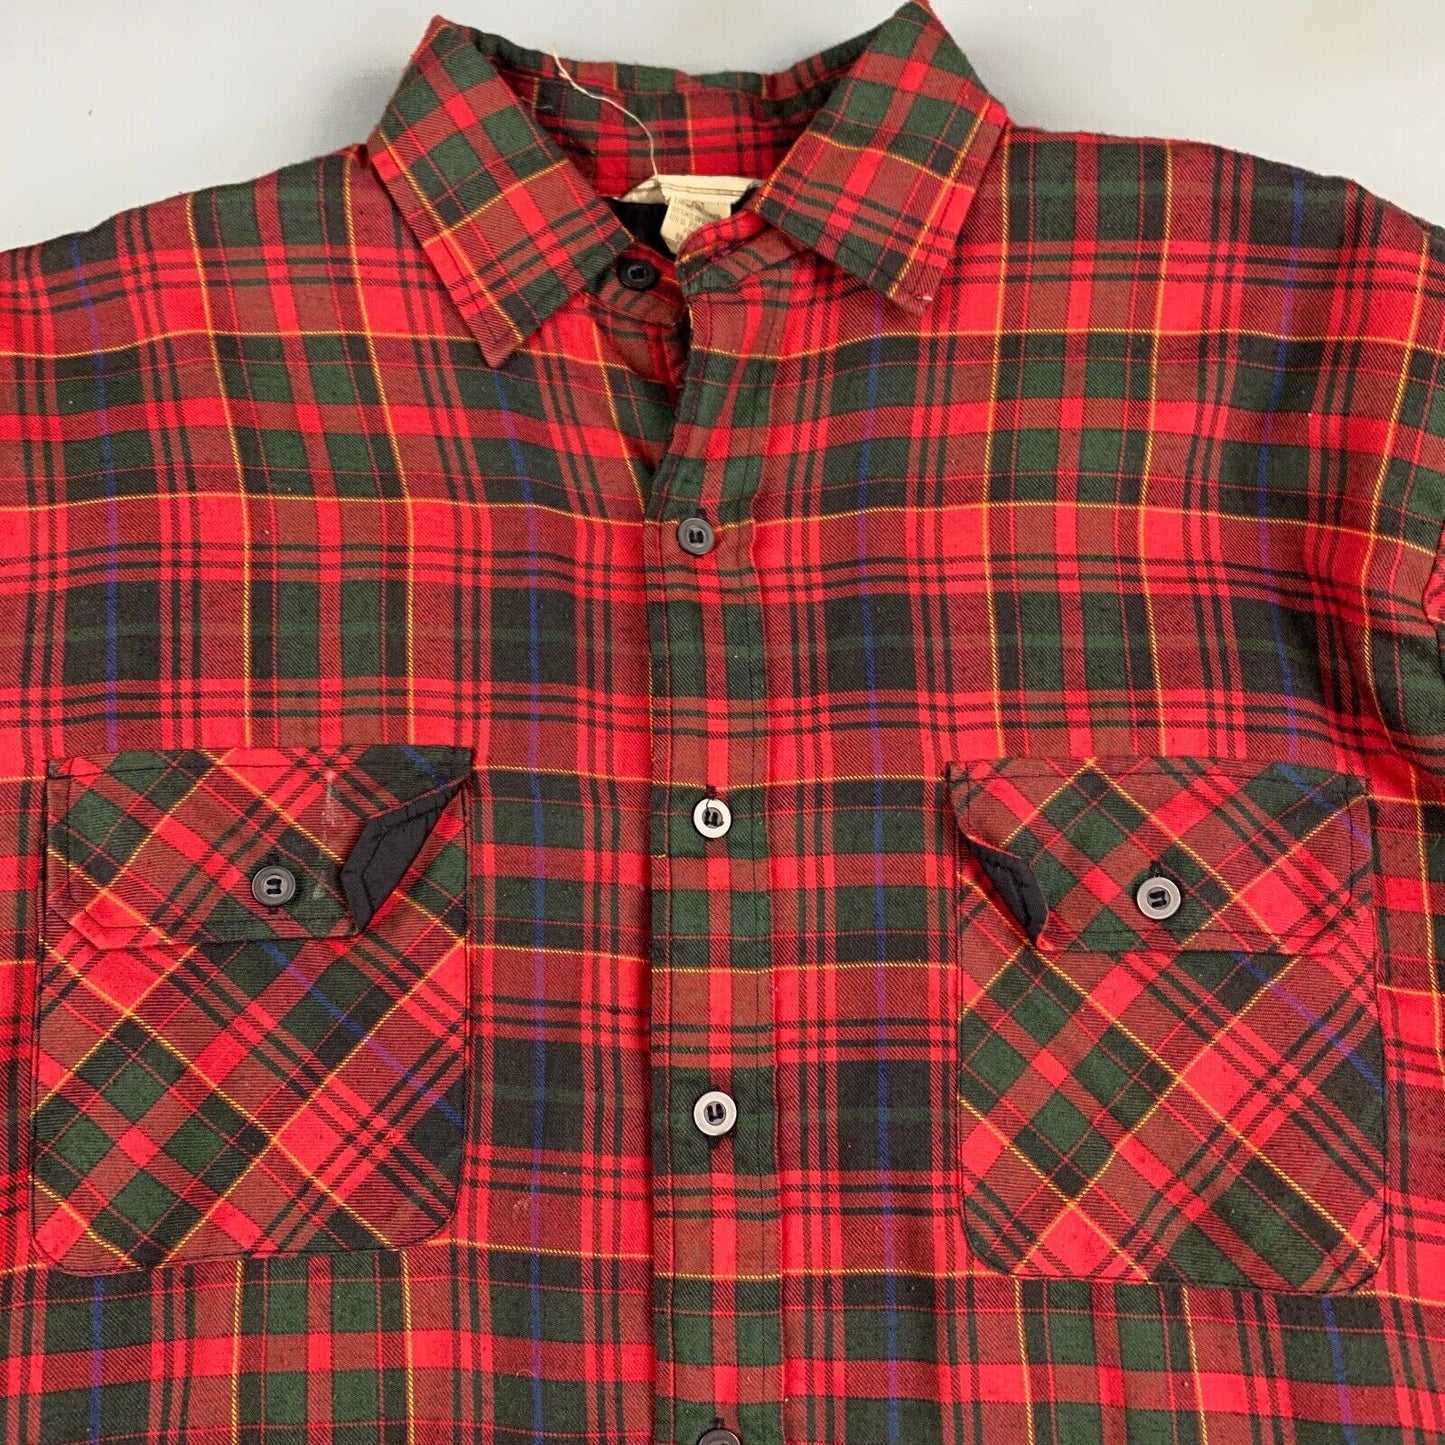 VINTAGE 90s Timber Run Plaid Flannel Lined Button Up Shirt sz Large Adult